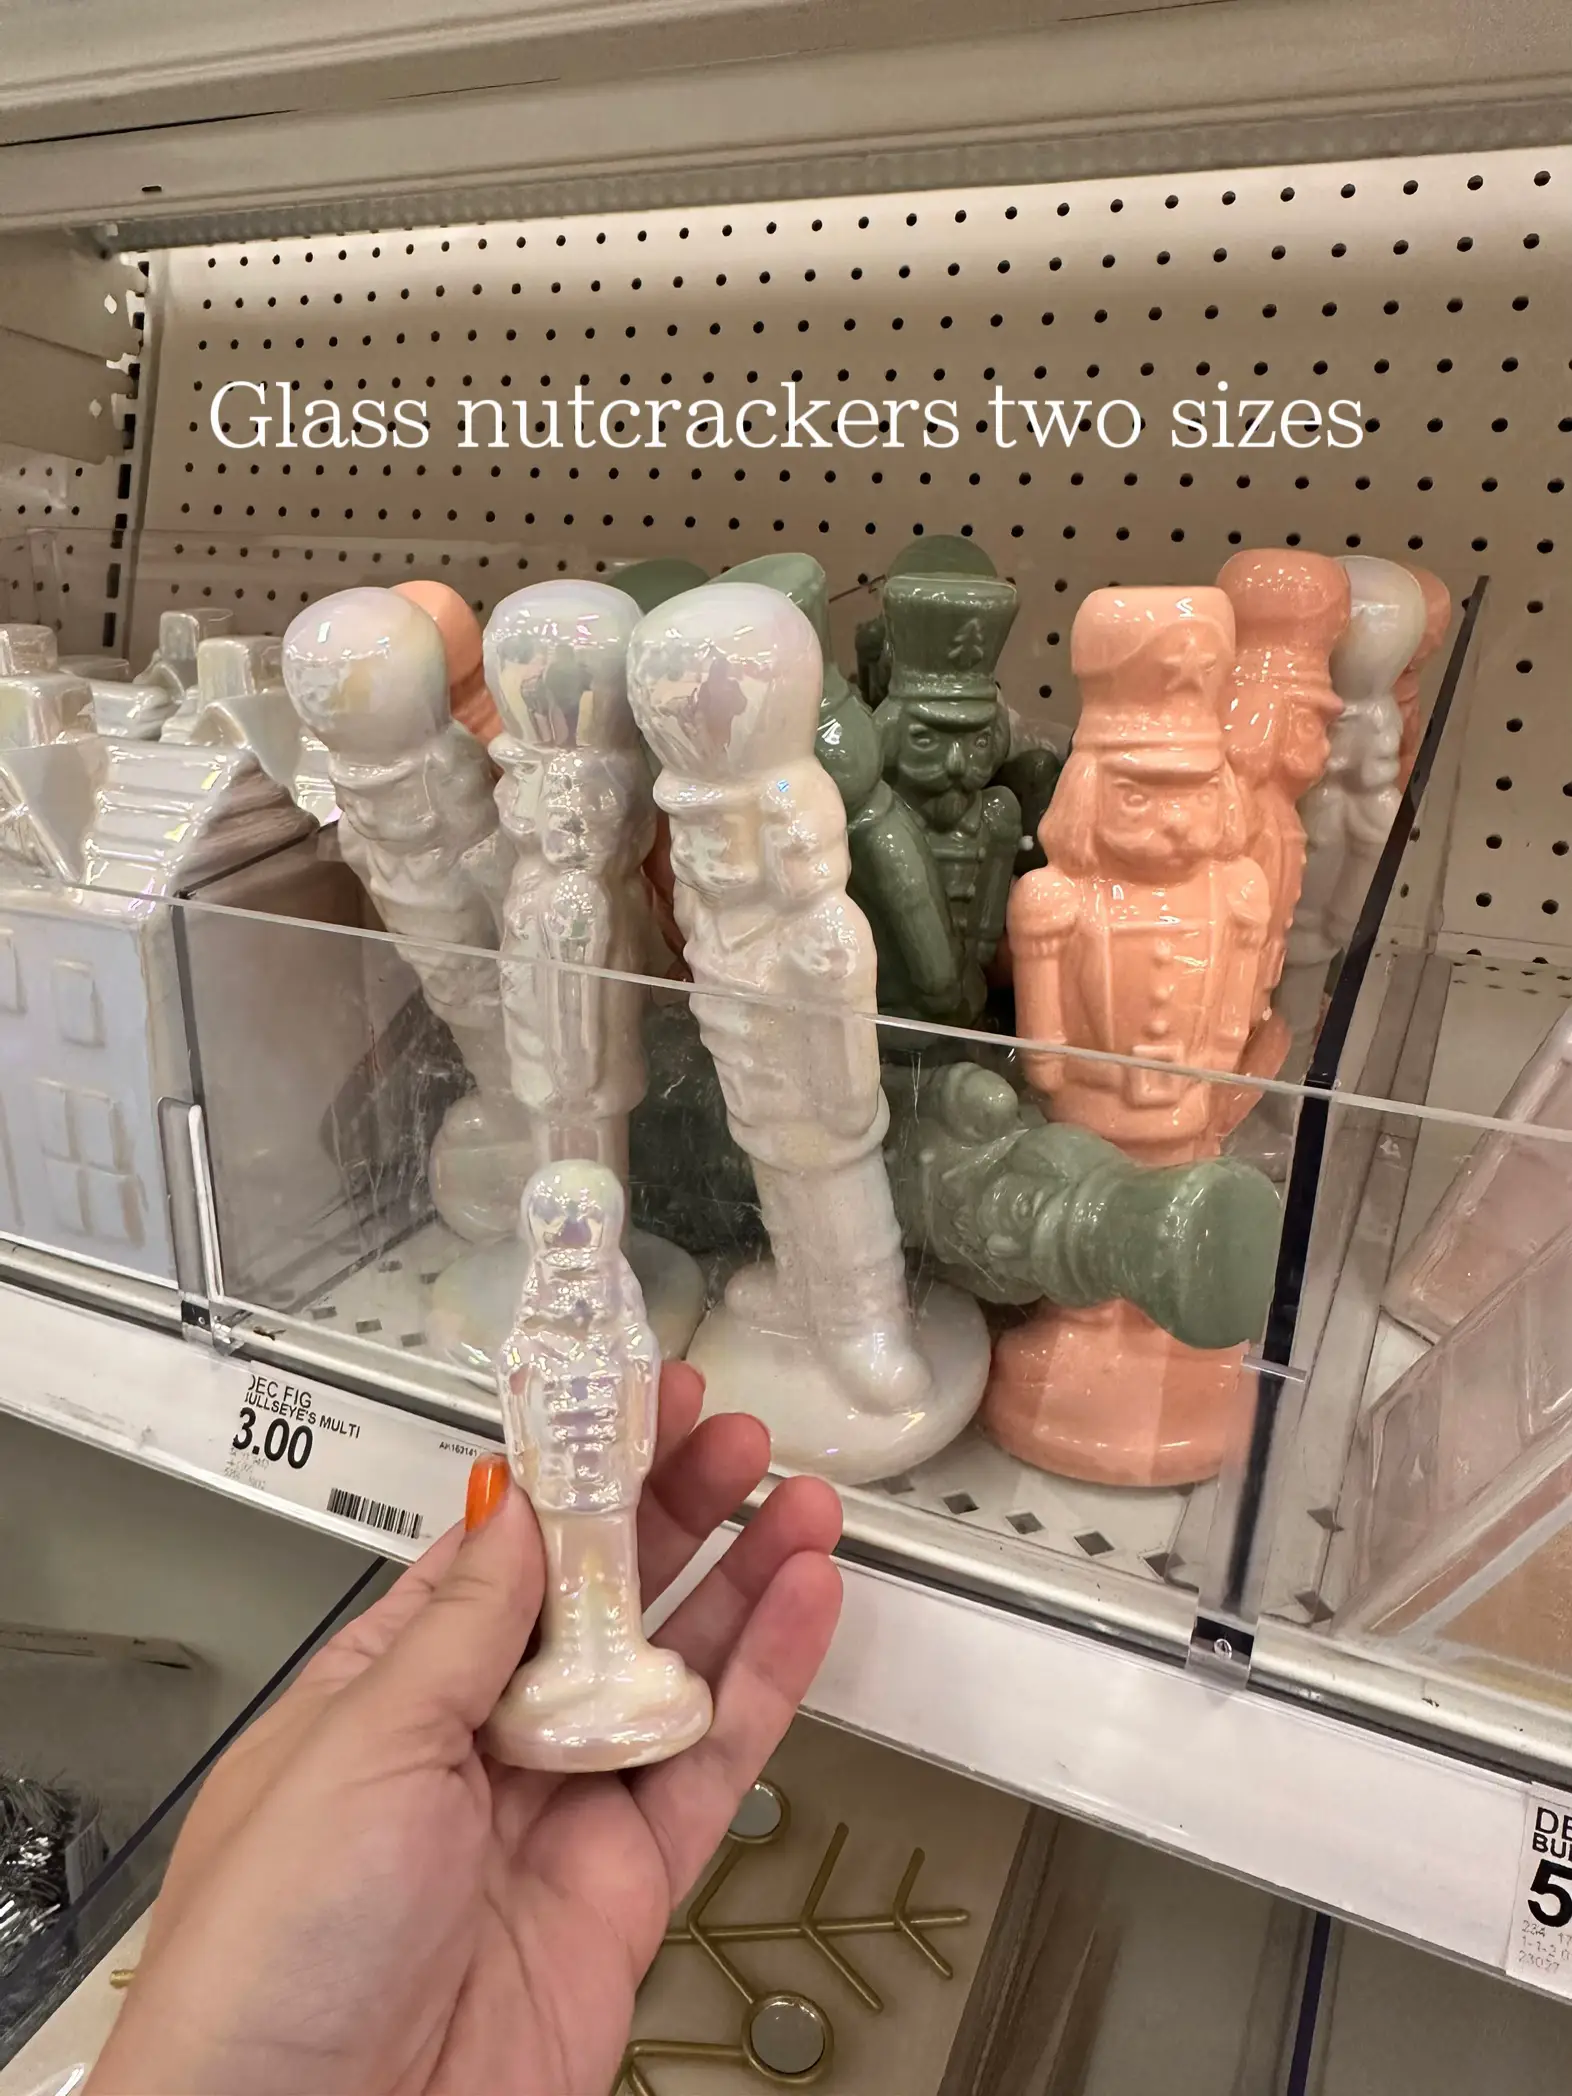  A person is holding a white nutcracker in their hand.